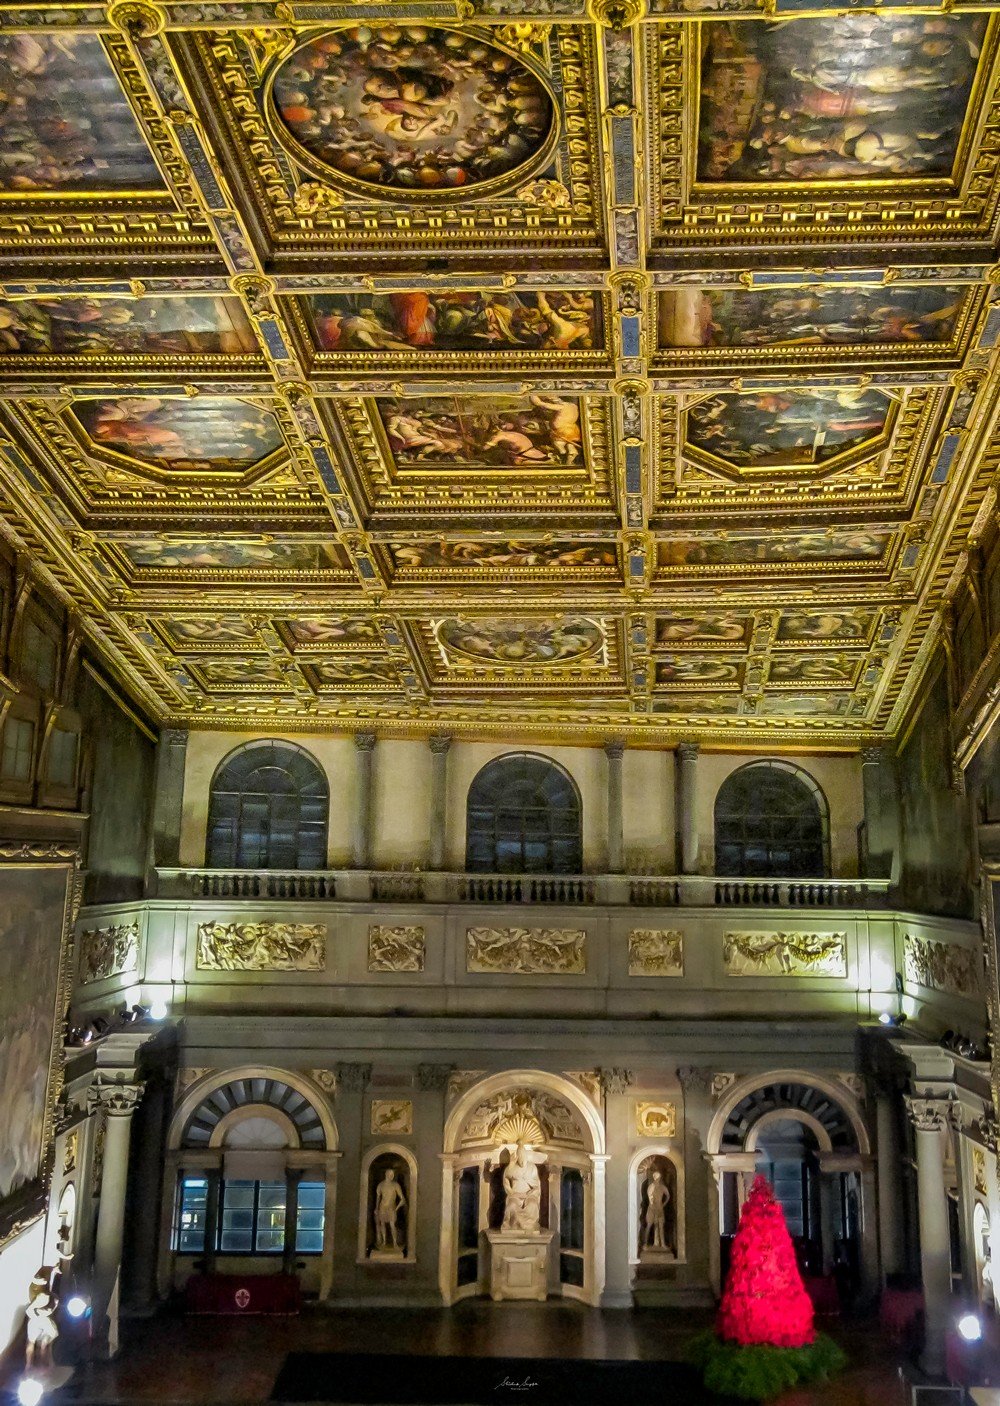 ‘Hall of the Five Hundred’ inside palazzo vecchio town hall situated on piazza del signoria in florence tuscany italy shot during summer